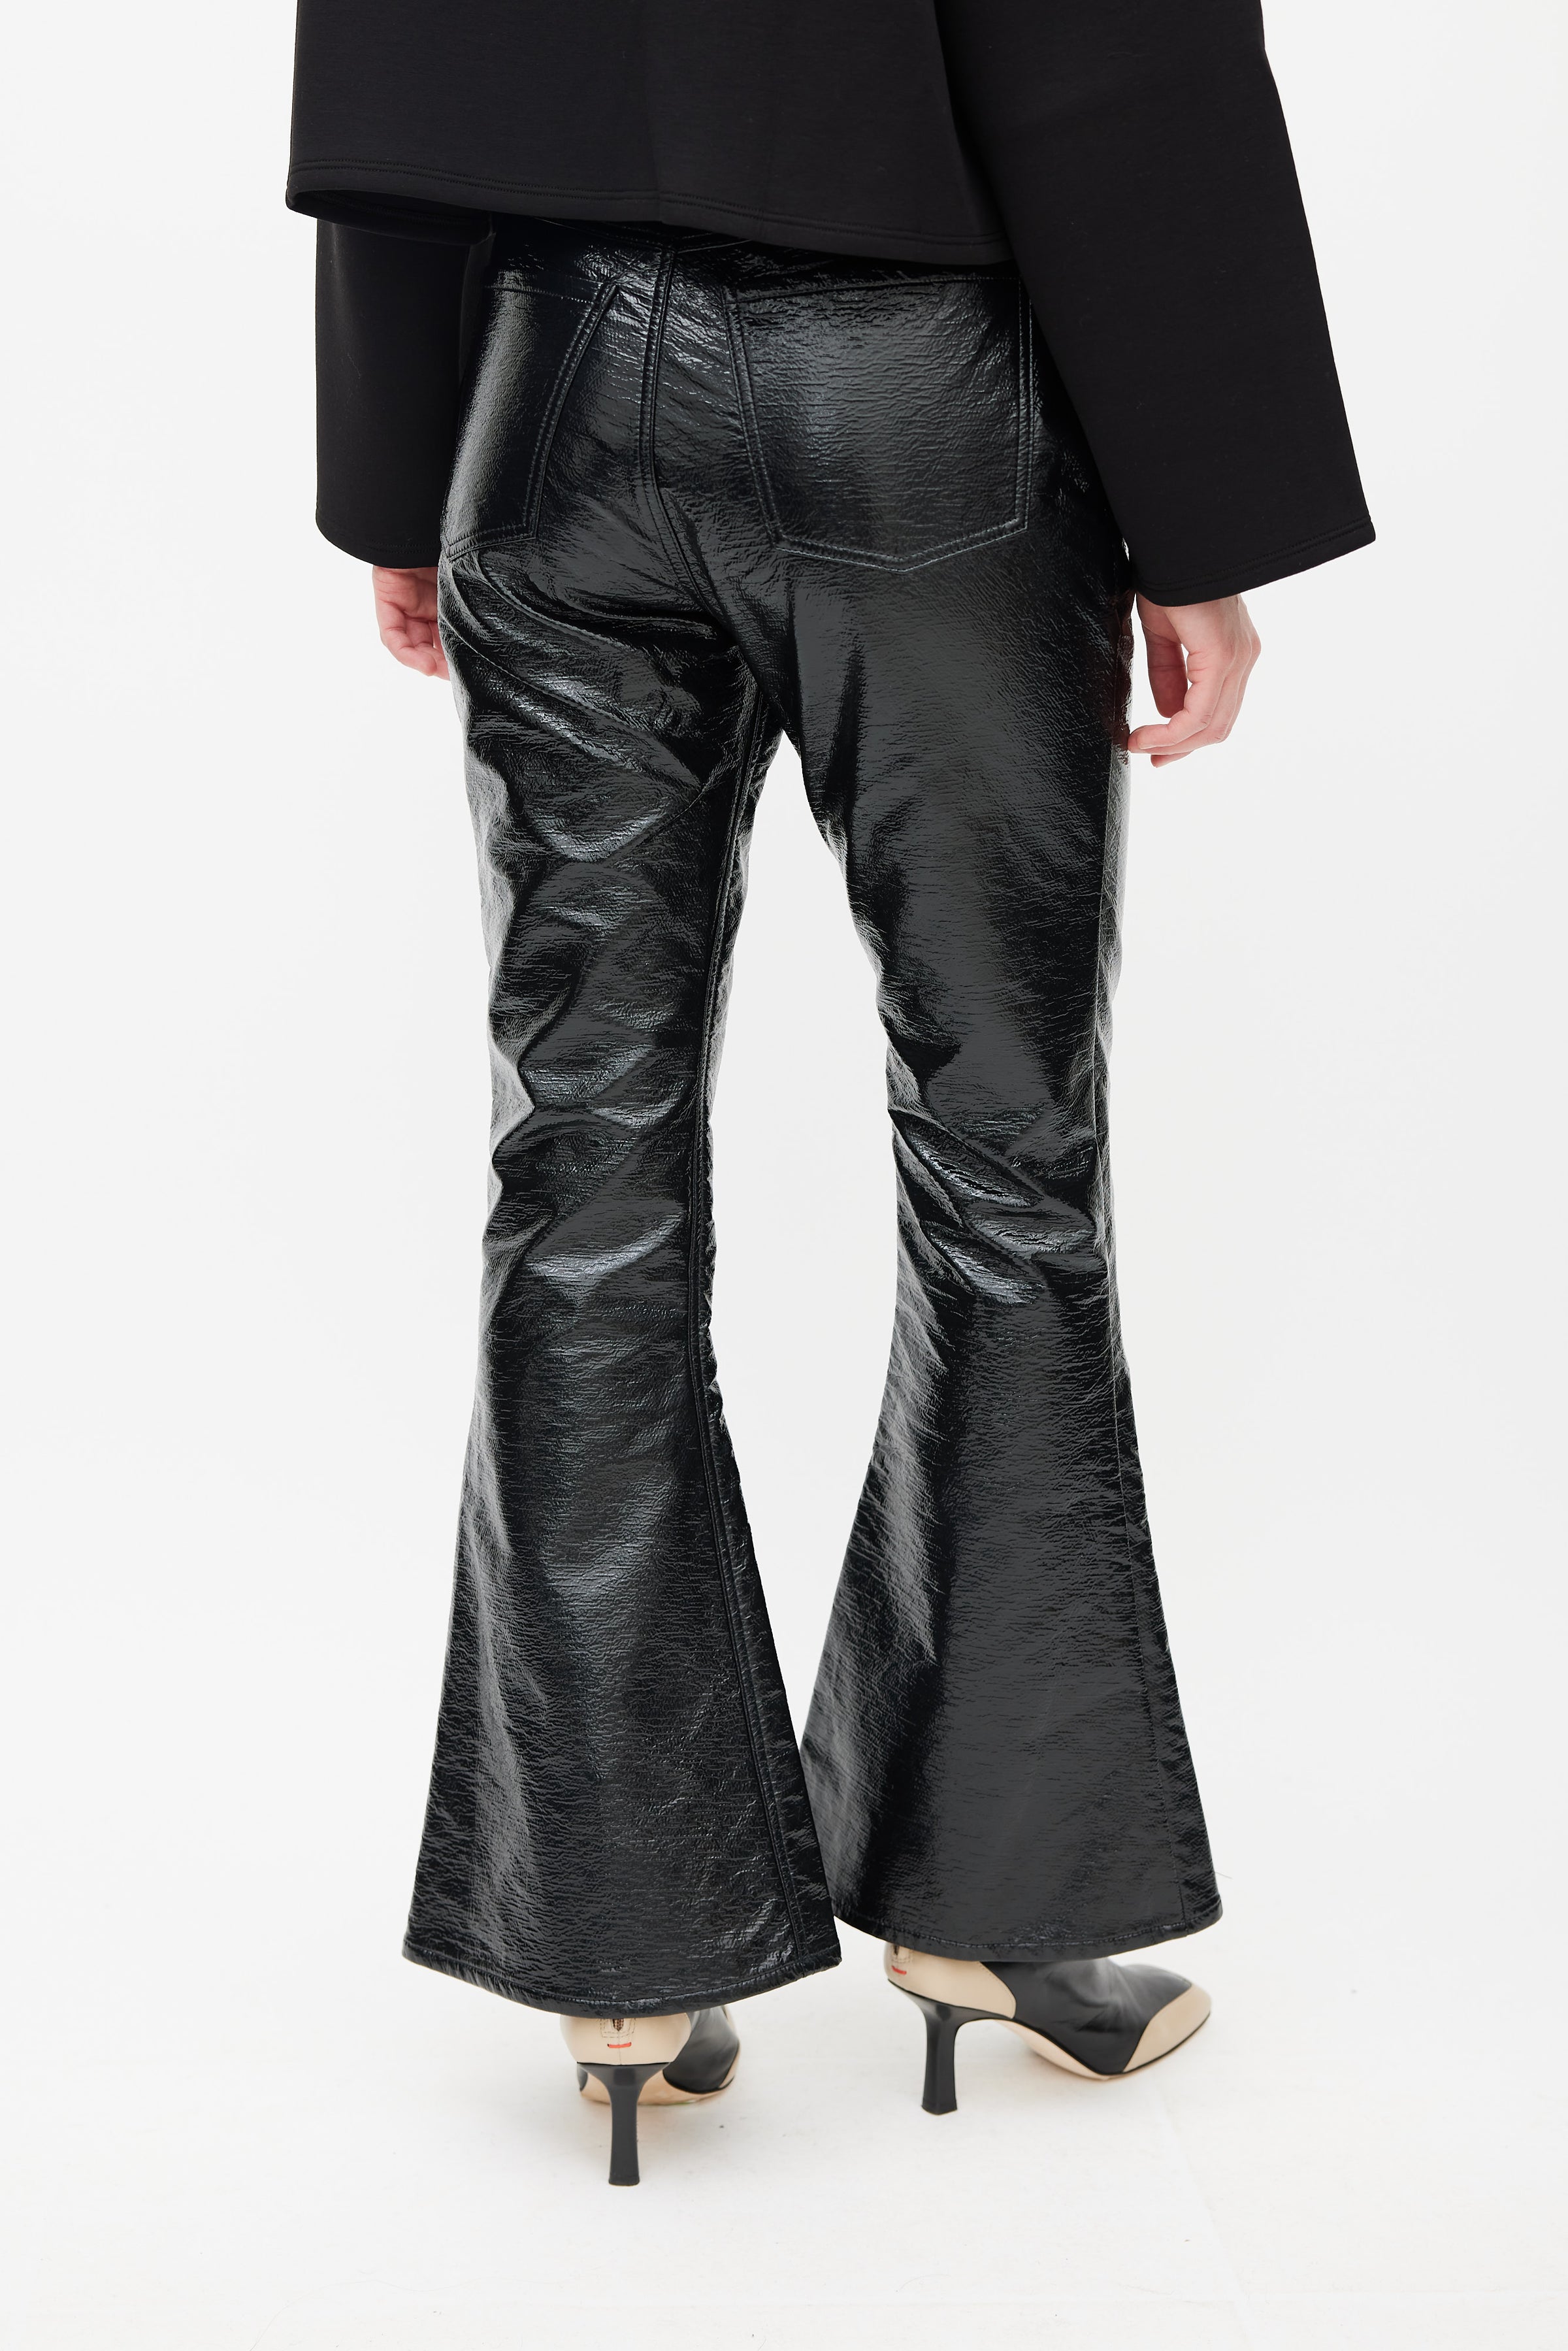 Beaufille // Black Faux Leather Veritas Flared Trouser – VSP Consignment